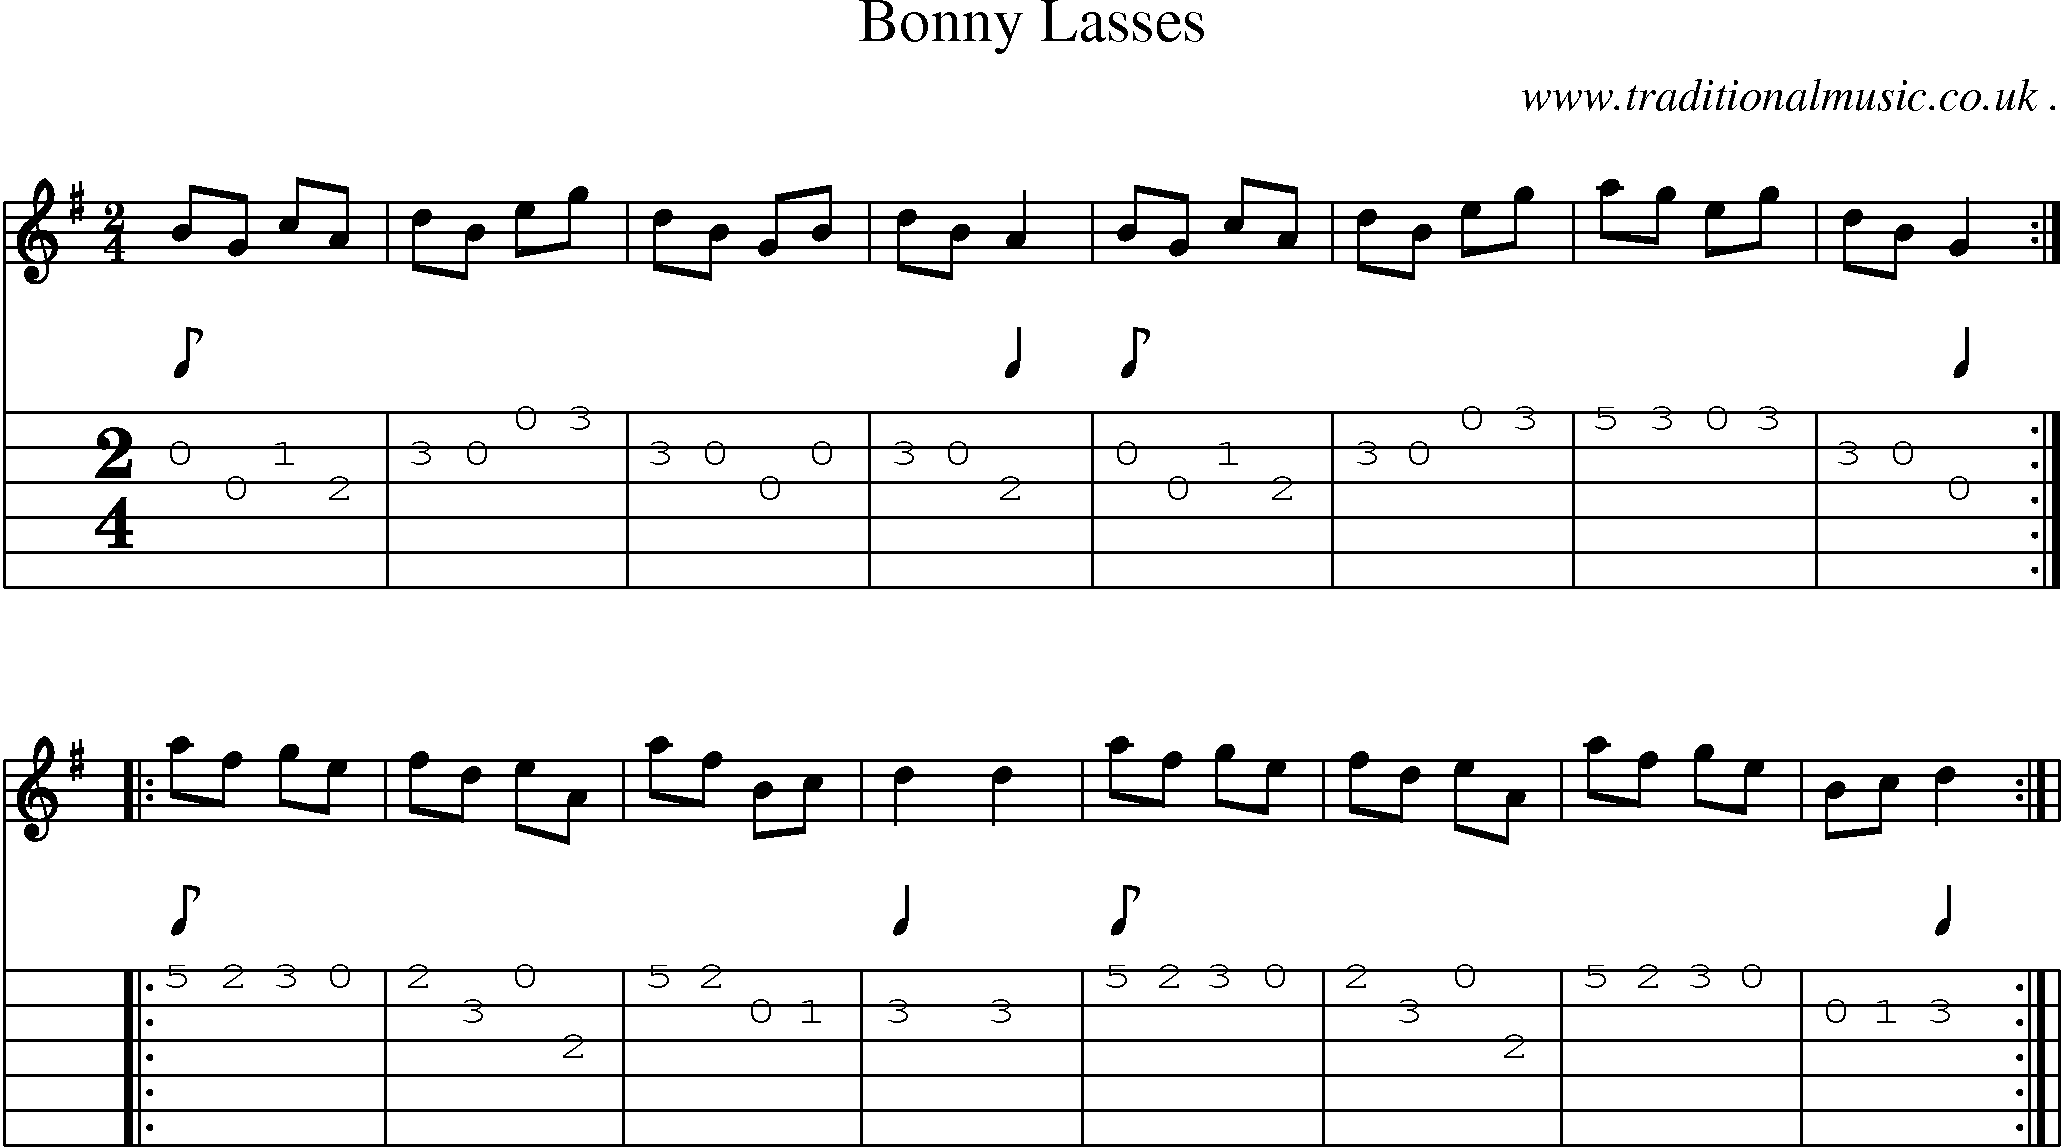 Sheet-Music and Guitar Tabs for Bonny Lasses